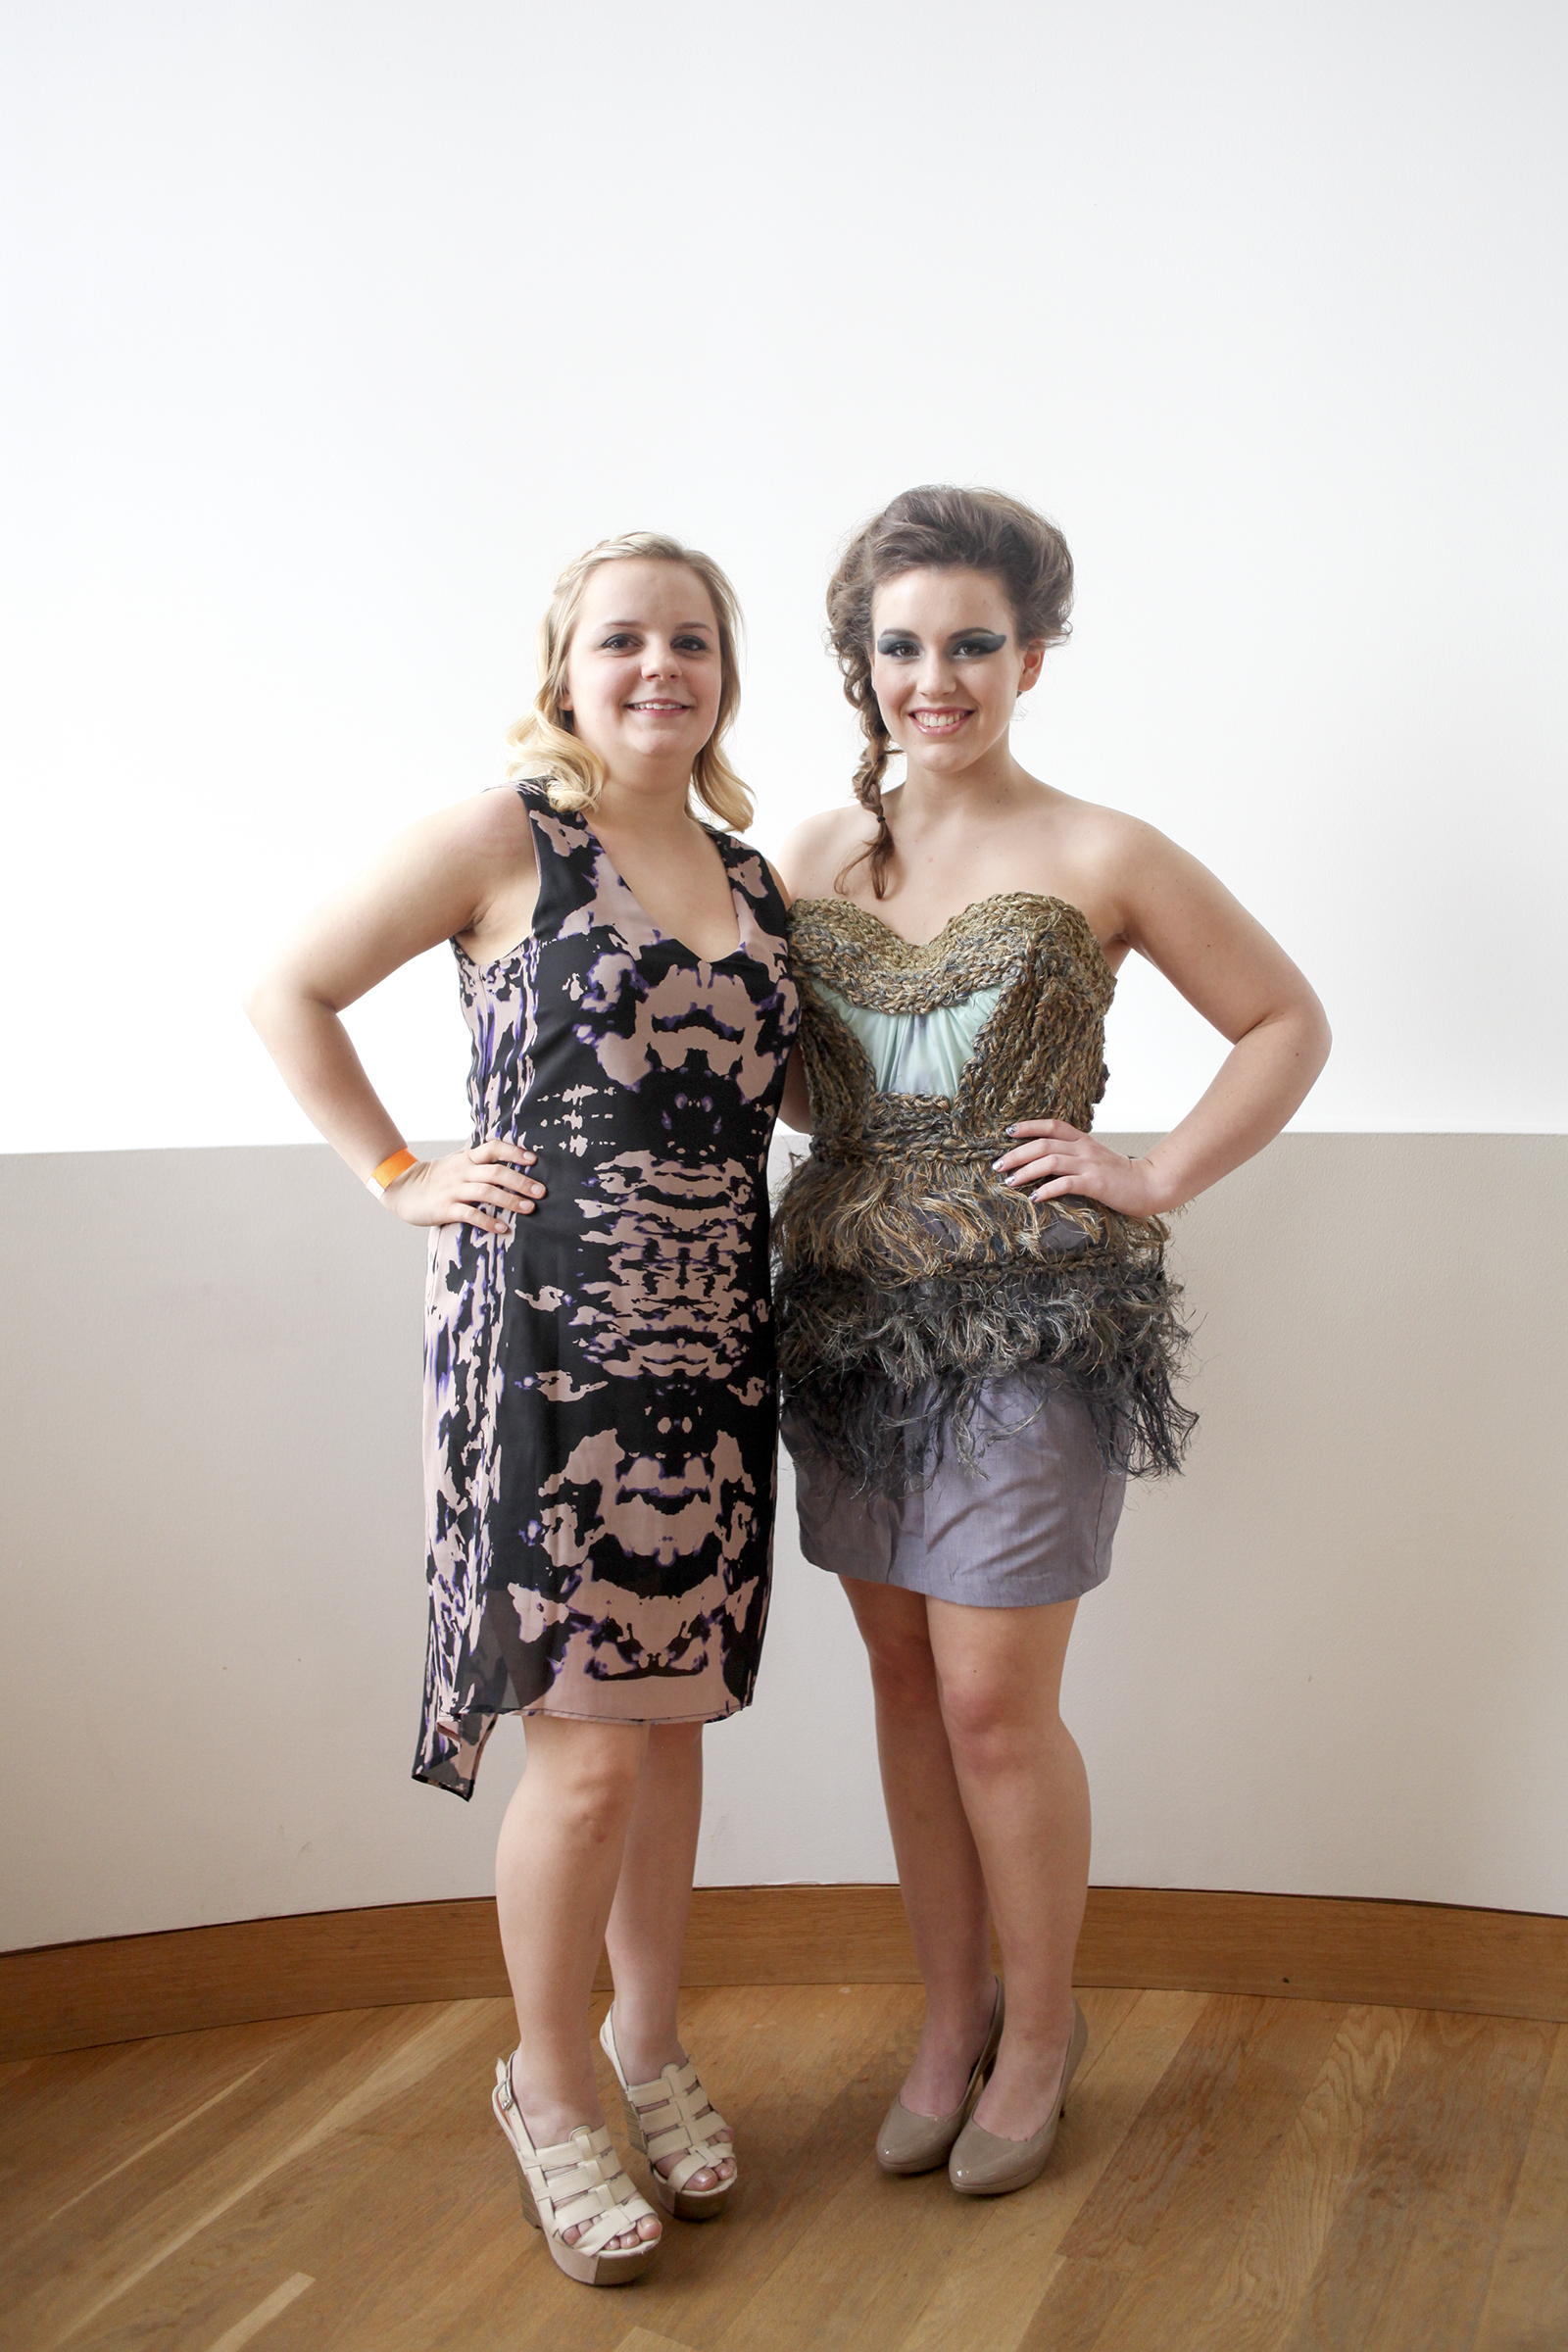 Designer Bridget Erl and model Kate Jeffy, Photo by Amy Gee